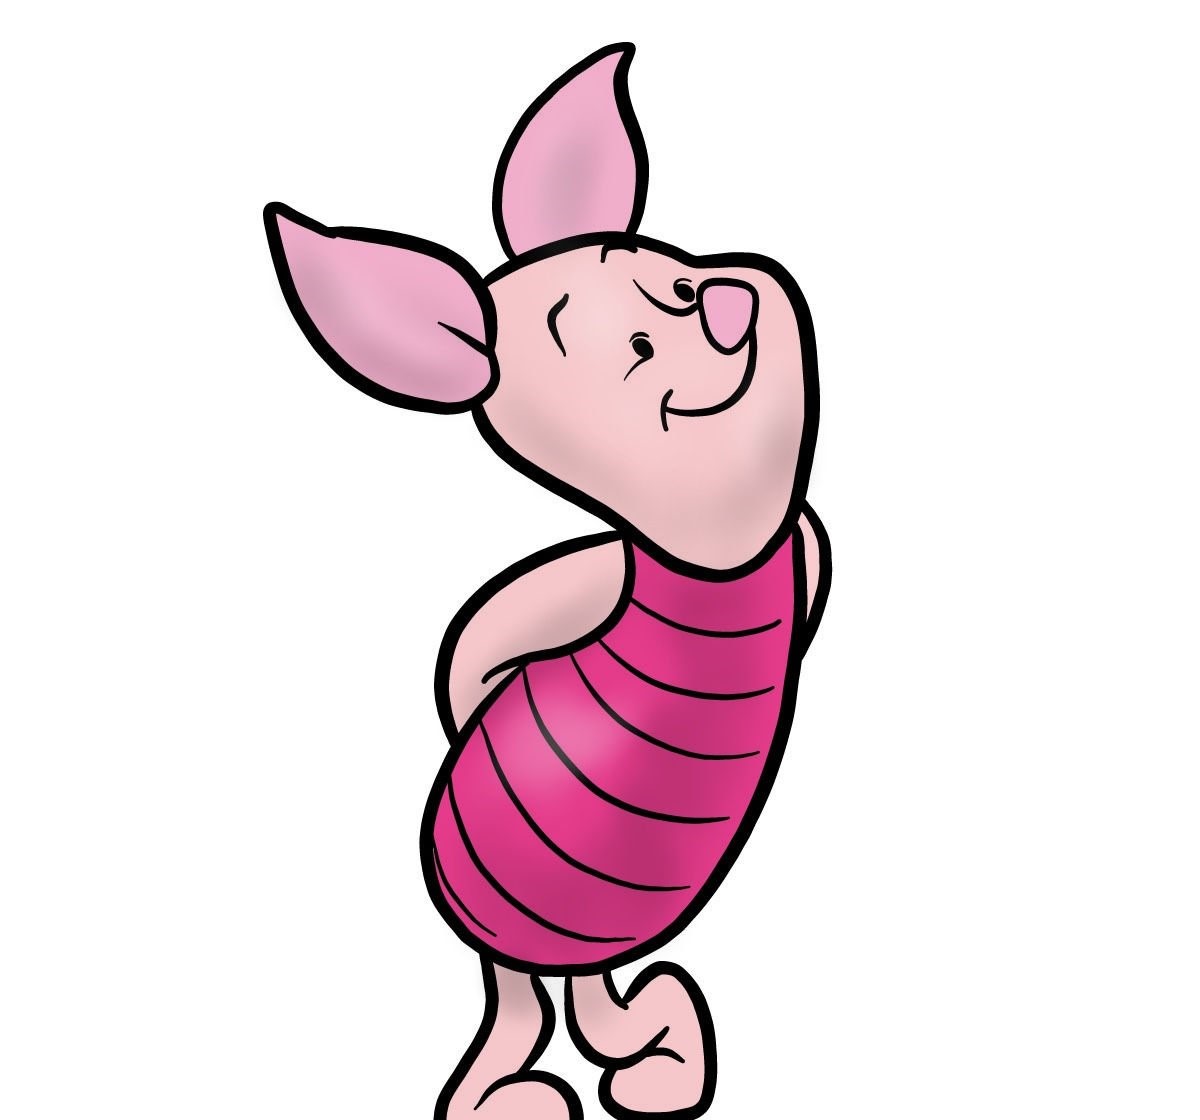 23 Facts About Piglet (Winnie The Pooh) 